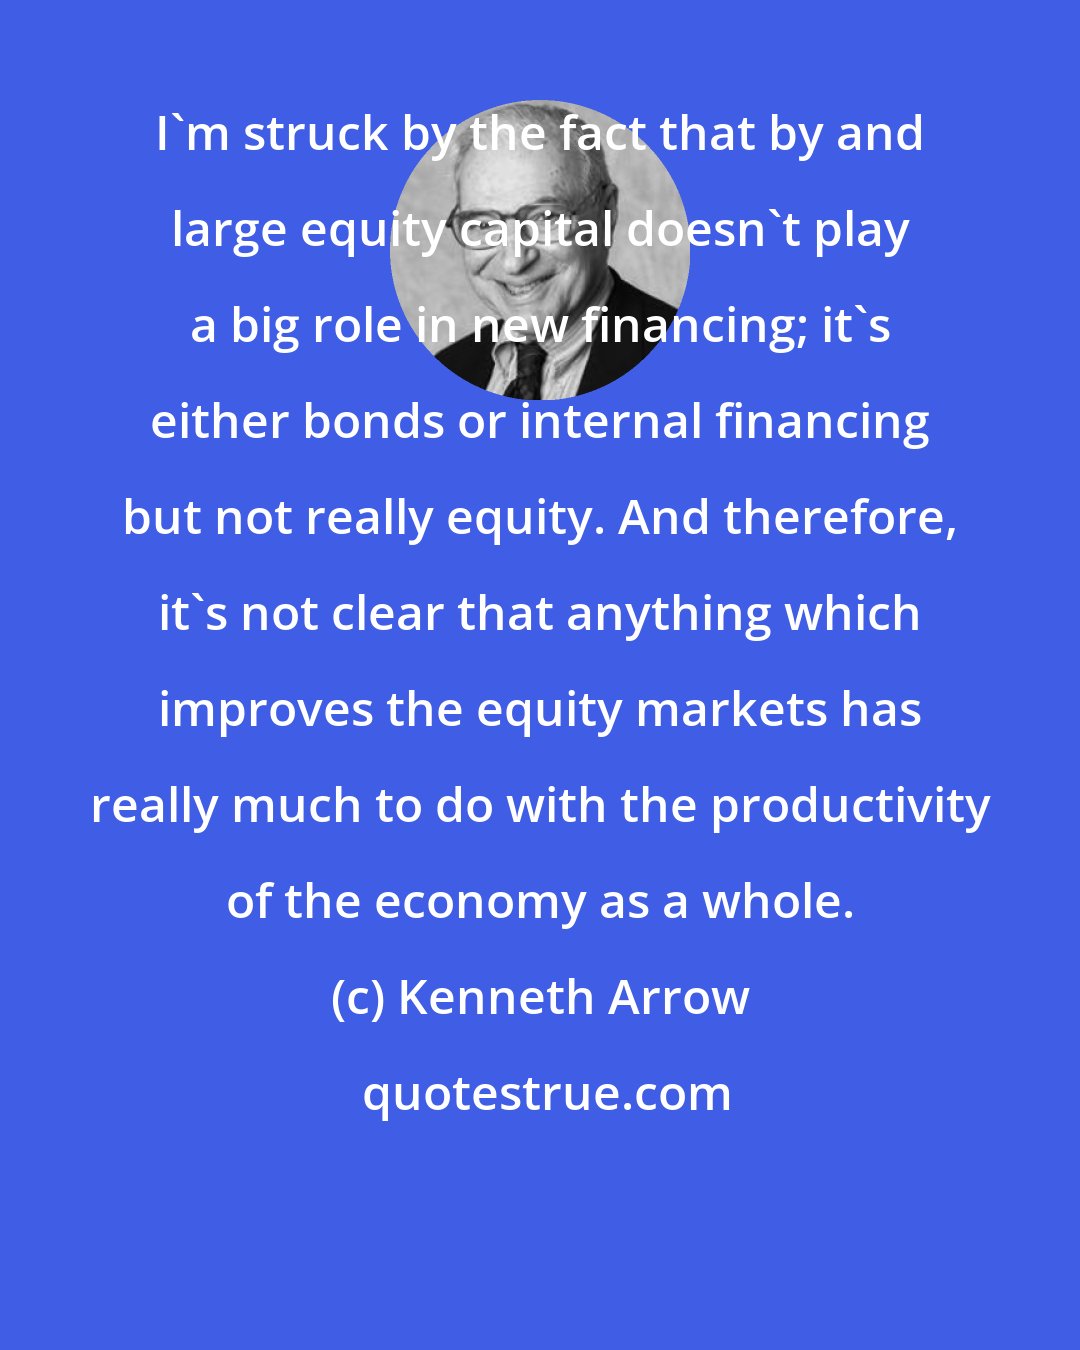 Kenneth Arrow: I'm struck by the fact that by and large equity capital doesn't play a big role in new financing; it's either bonds or internal financing but not really equity. And therefore, it's not clear that anything which improves the equity markets has really much to do with the productivity of the economy as a whole.